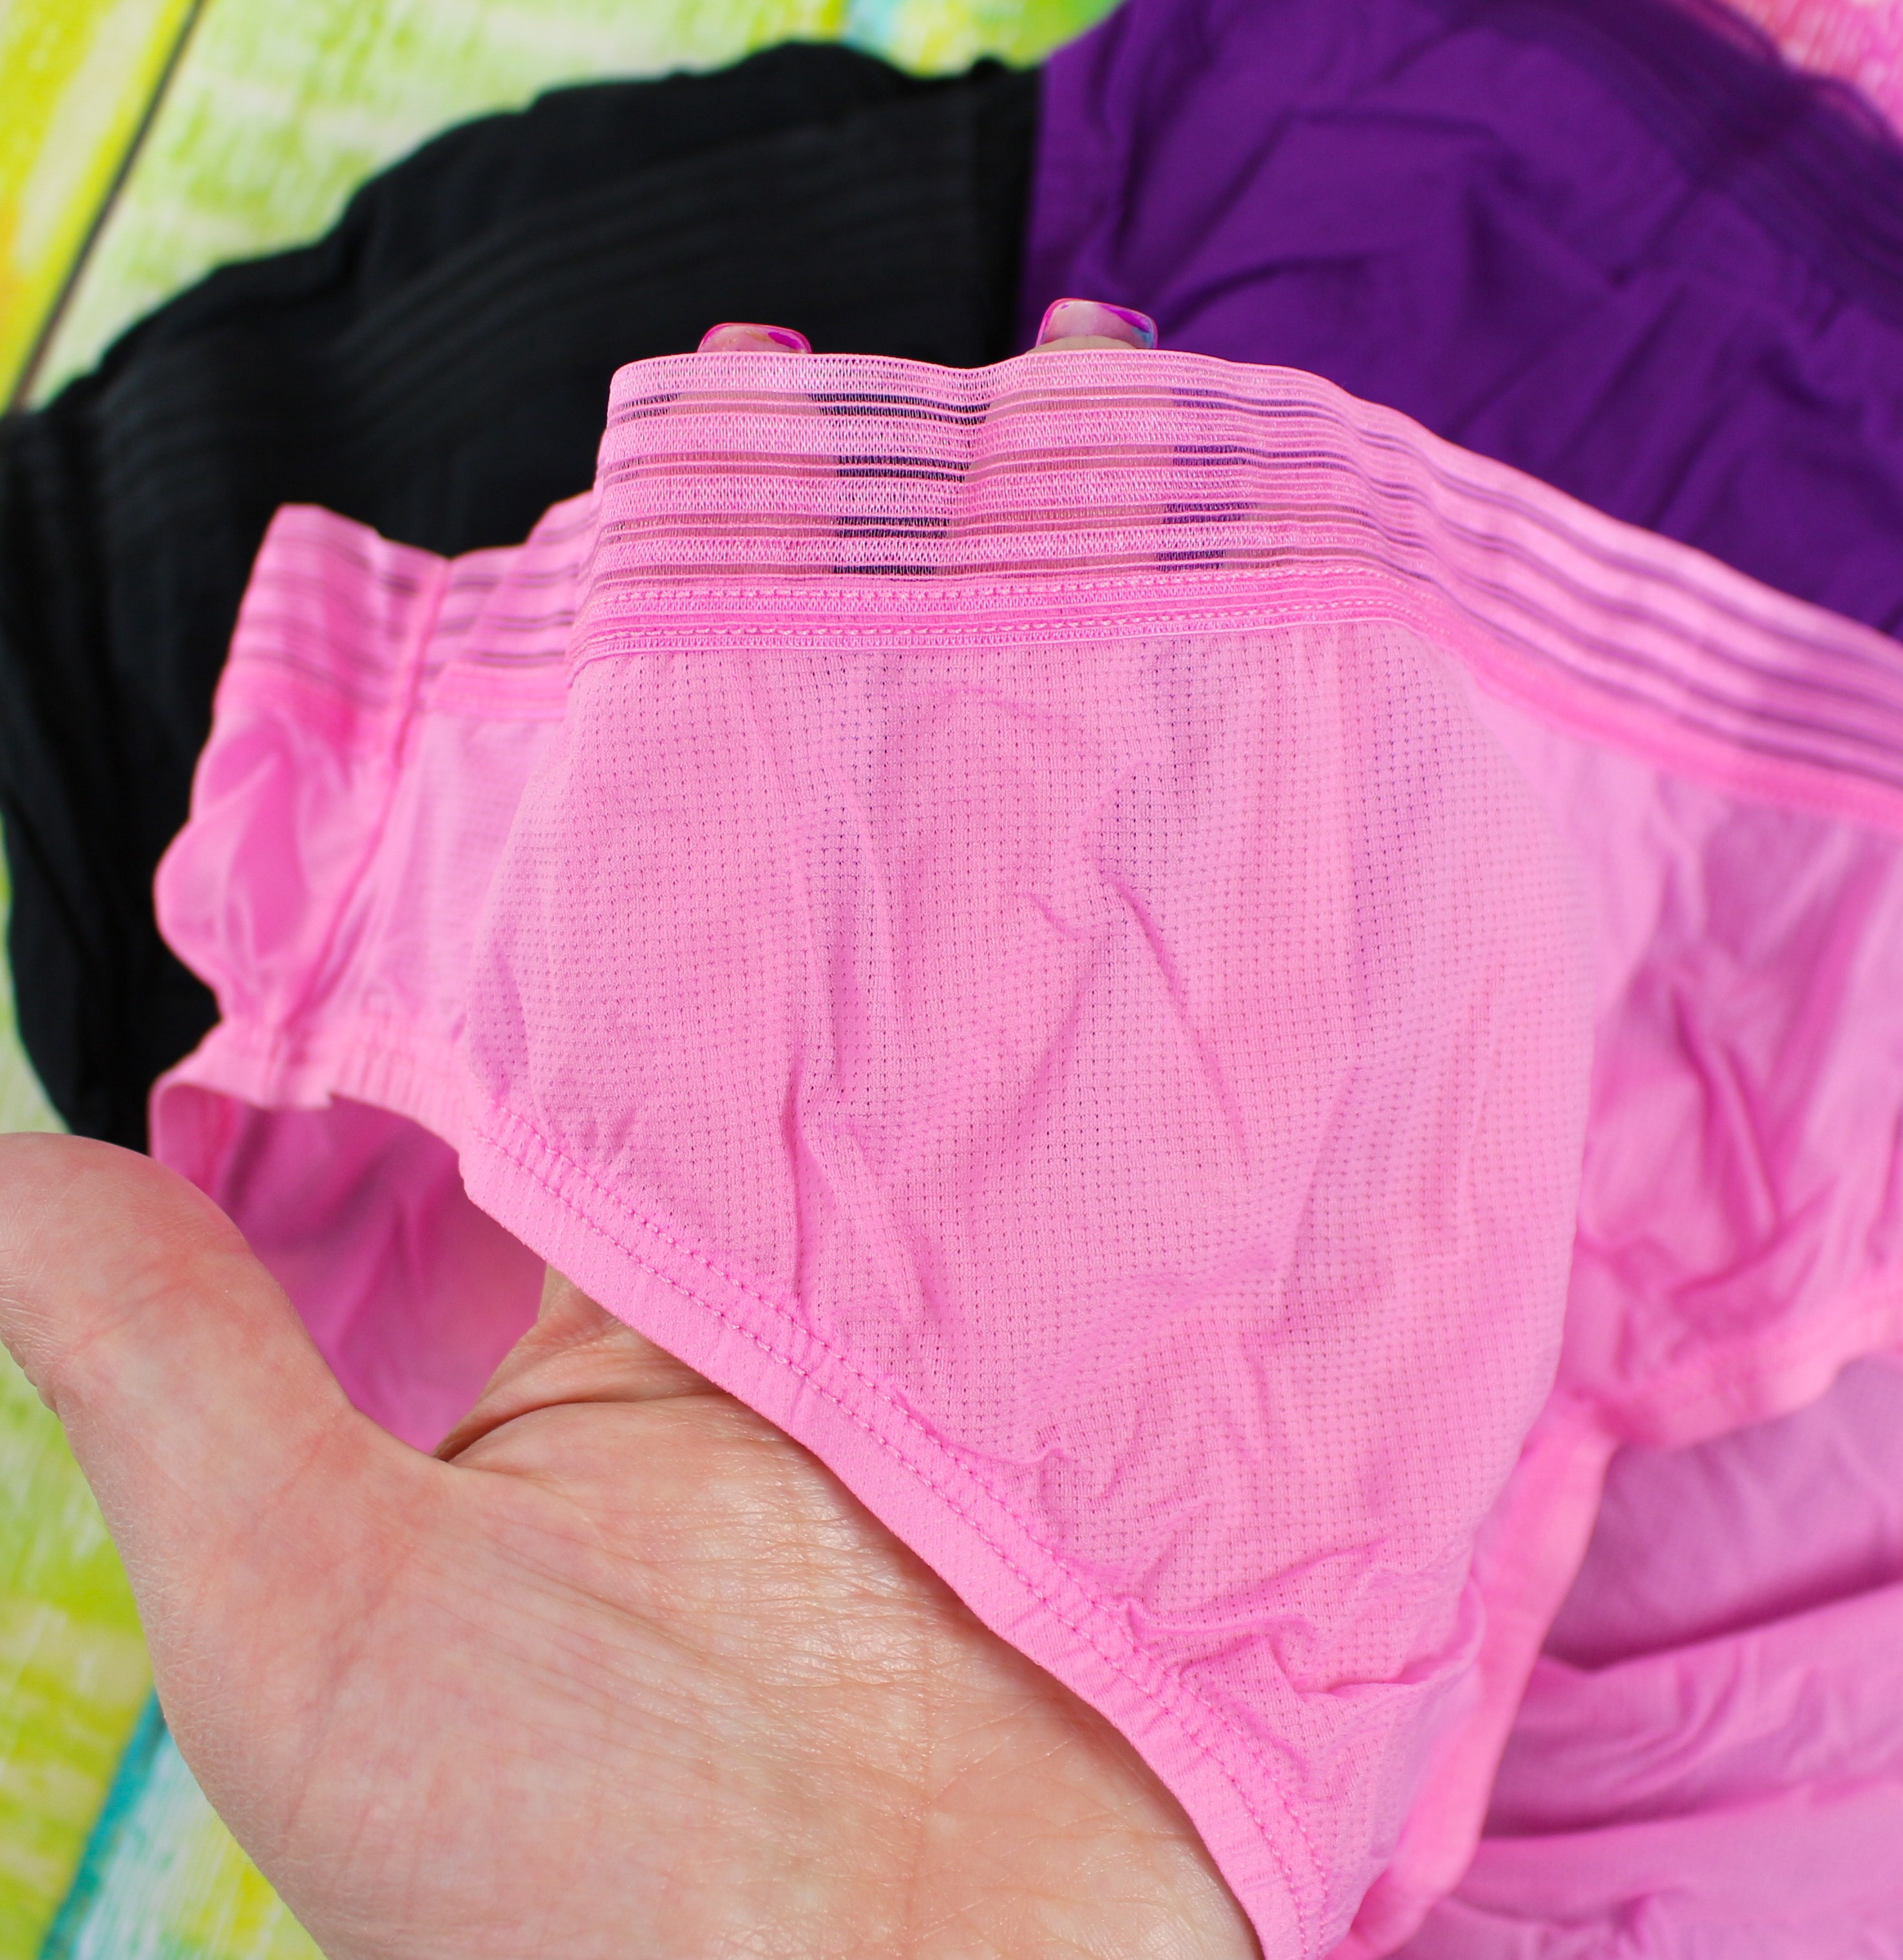 Staying Confident This Spring With EverLight Panties From Fruit Of The Loom  - Love for Lacquer